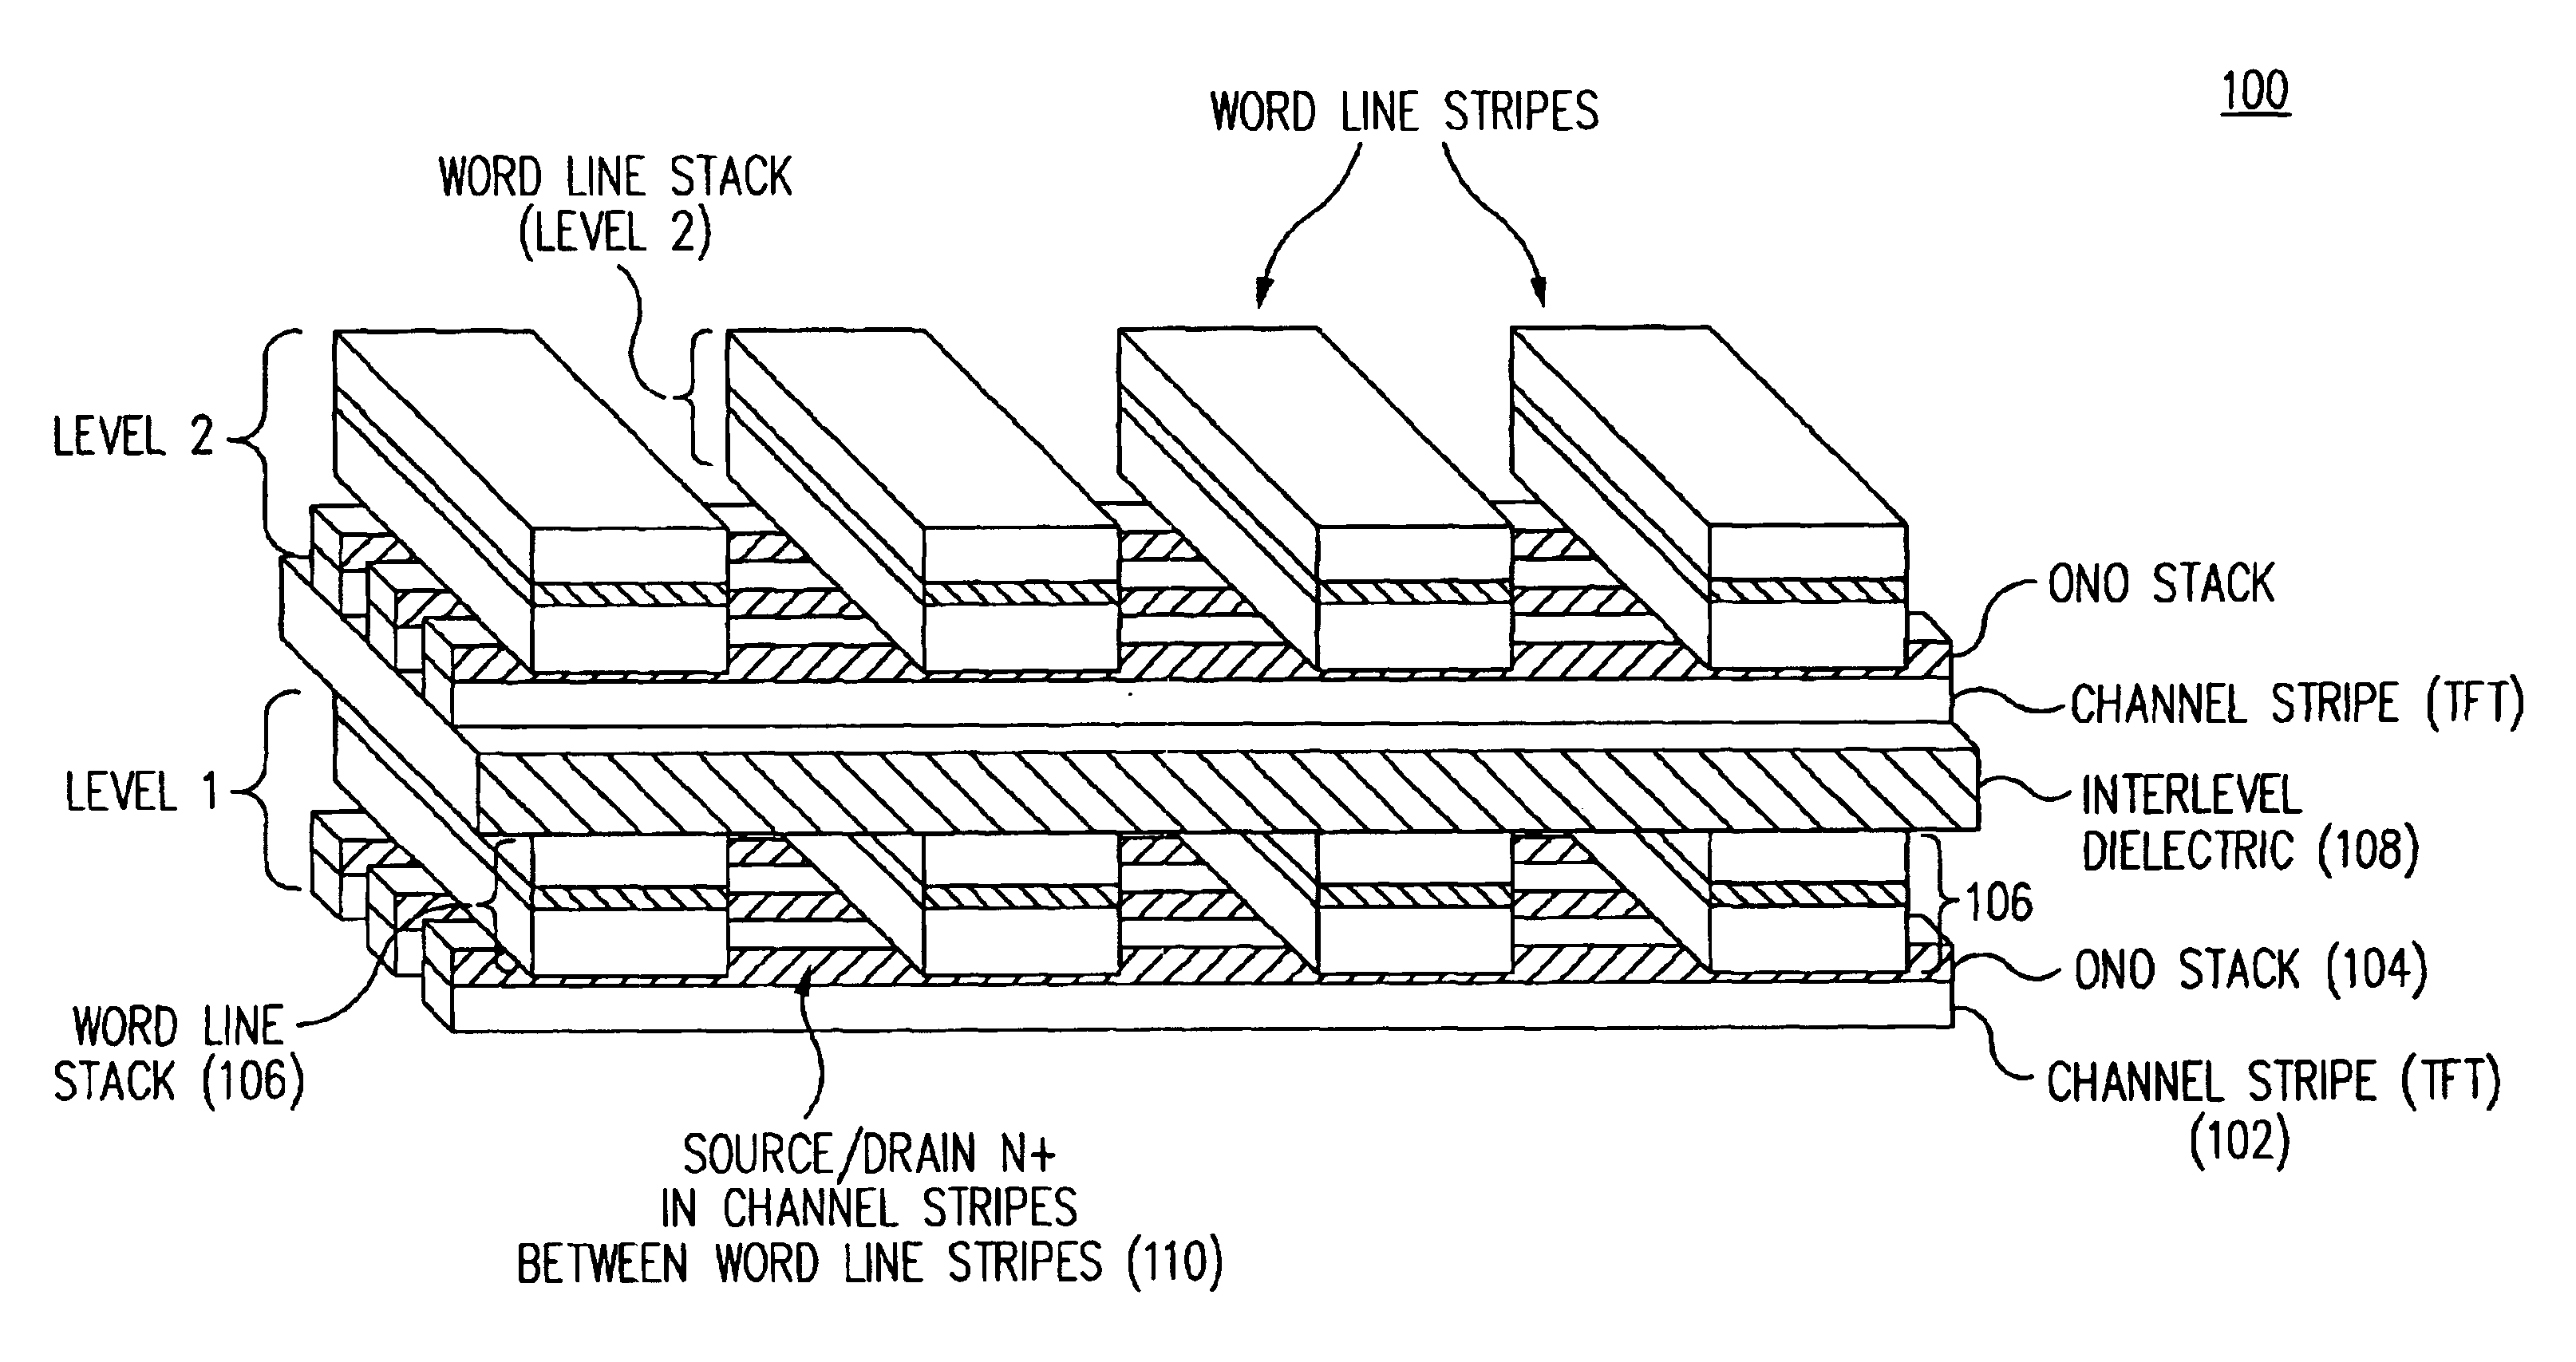 Method for fabricating programmable memory array structures incorporating series-connected transistor strings